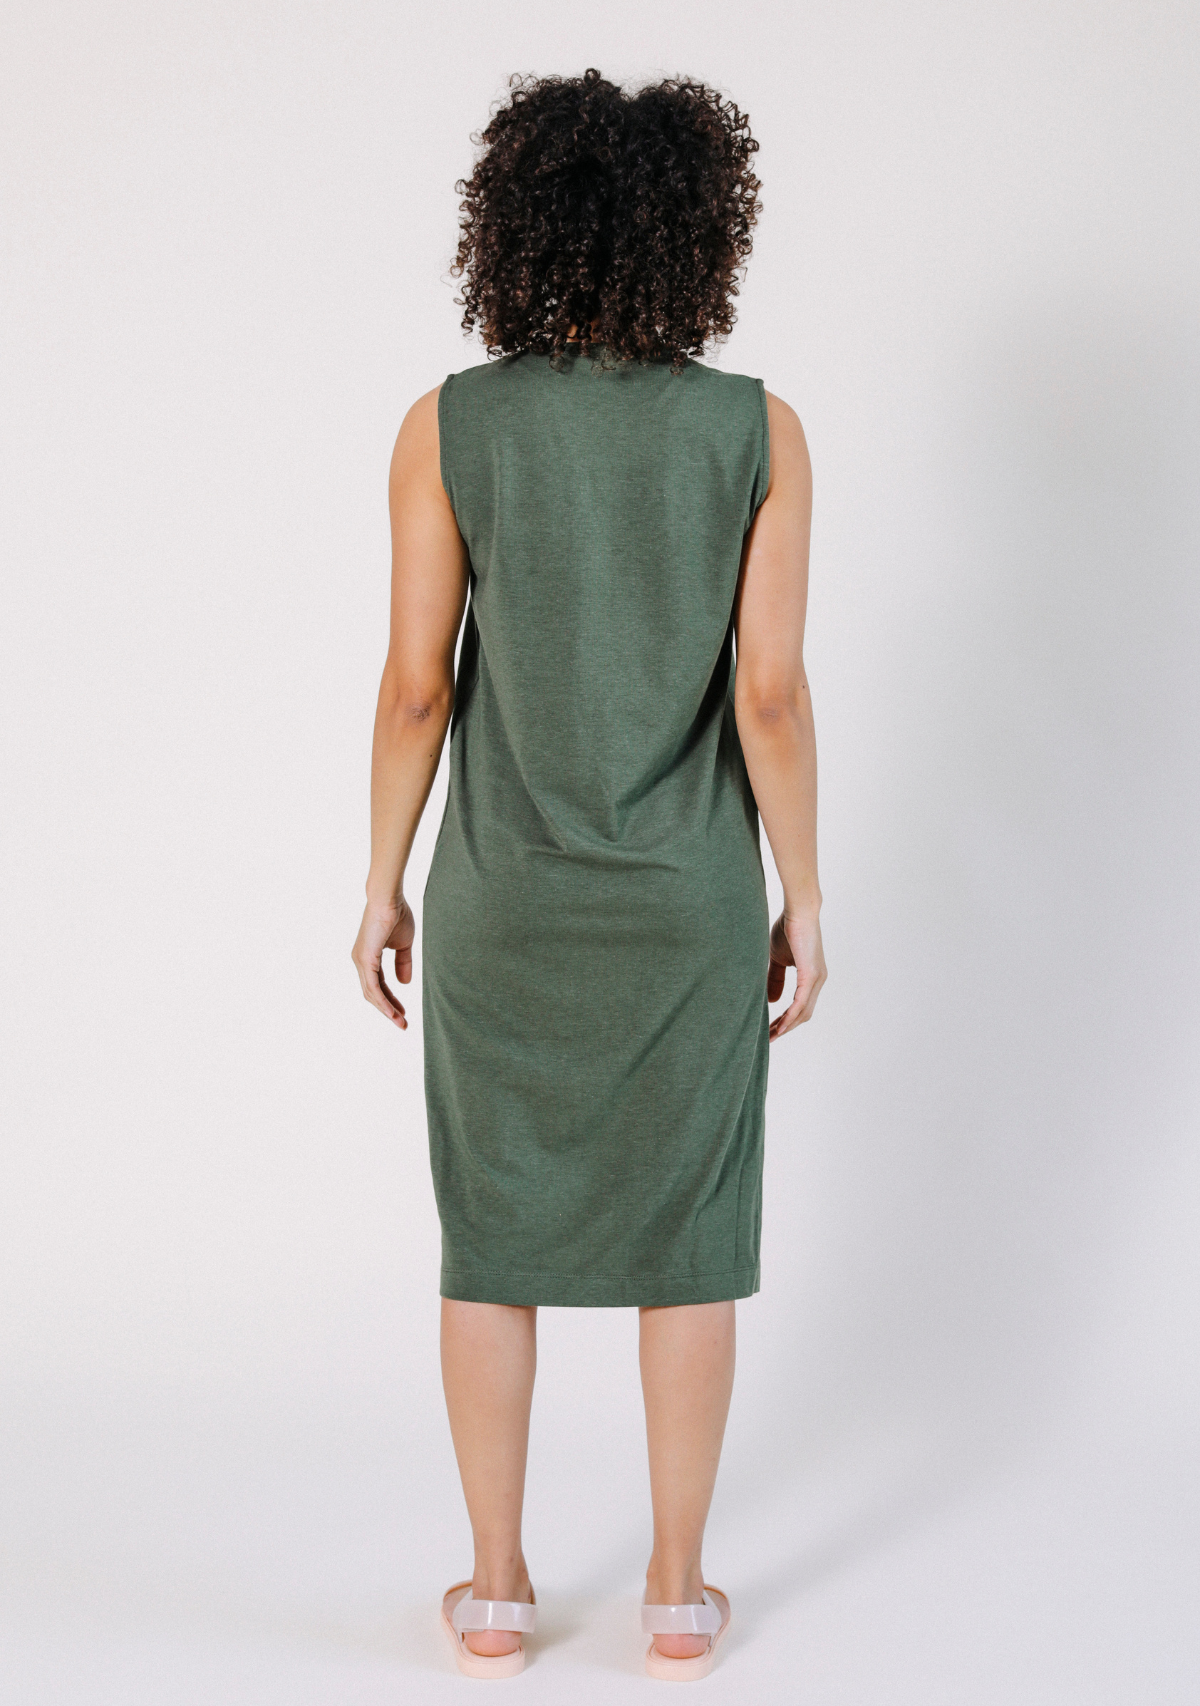 Tank Dress made from TENCEL™ and Organic Cotton Jersey sizes XS-3X color moss green